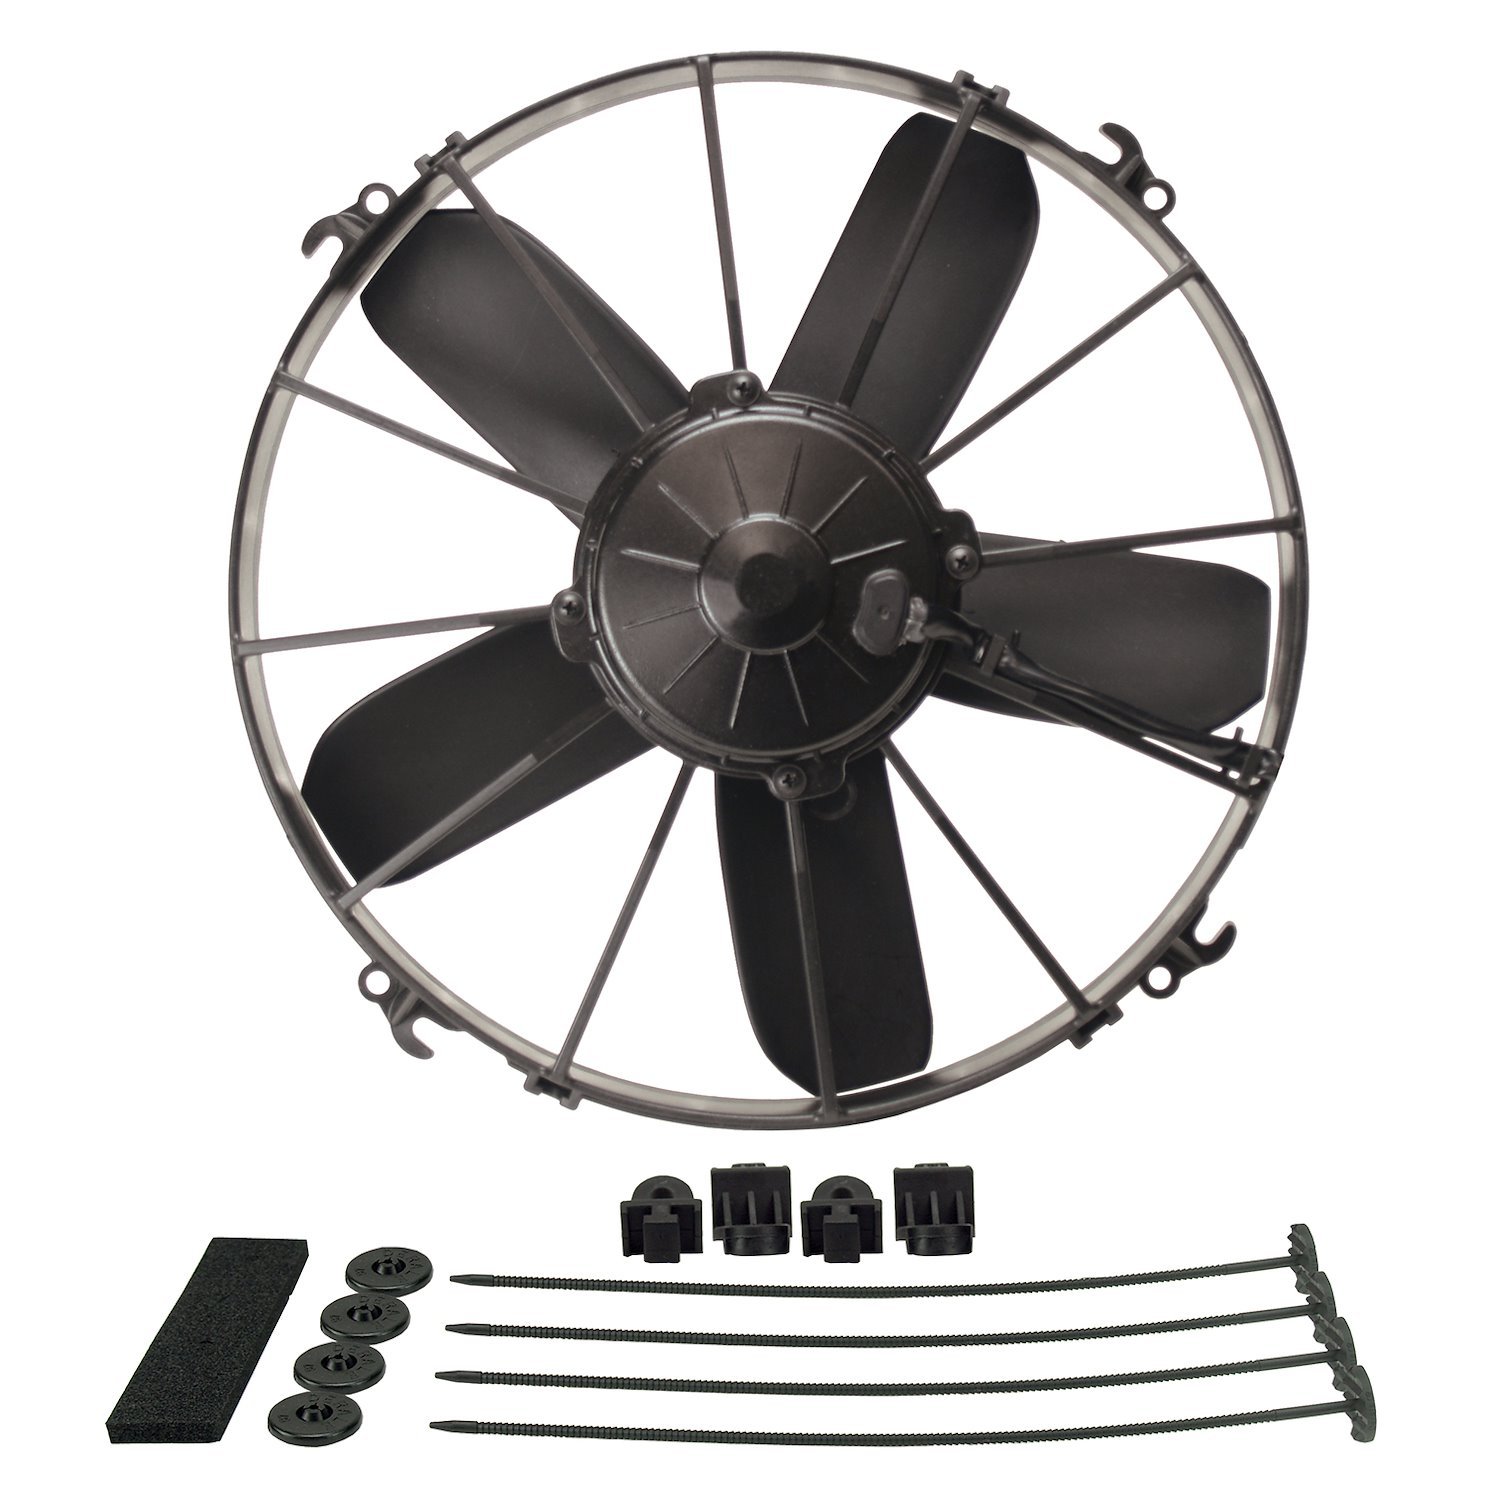 H.O. Extreme 13" Paddle Blade Puller Electric Fan